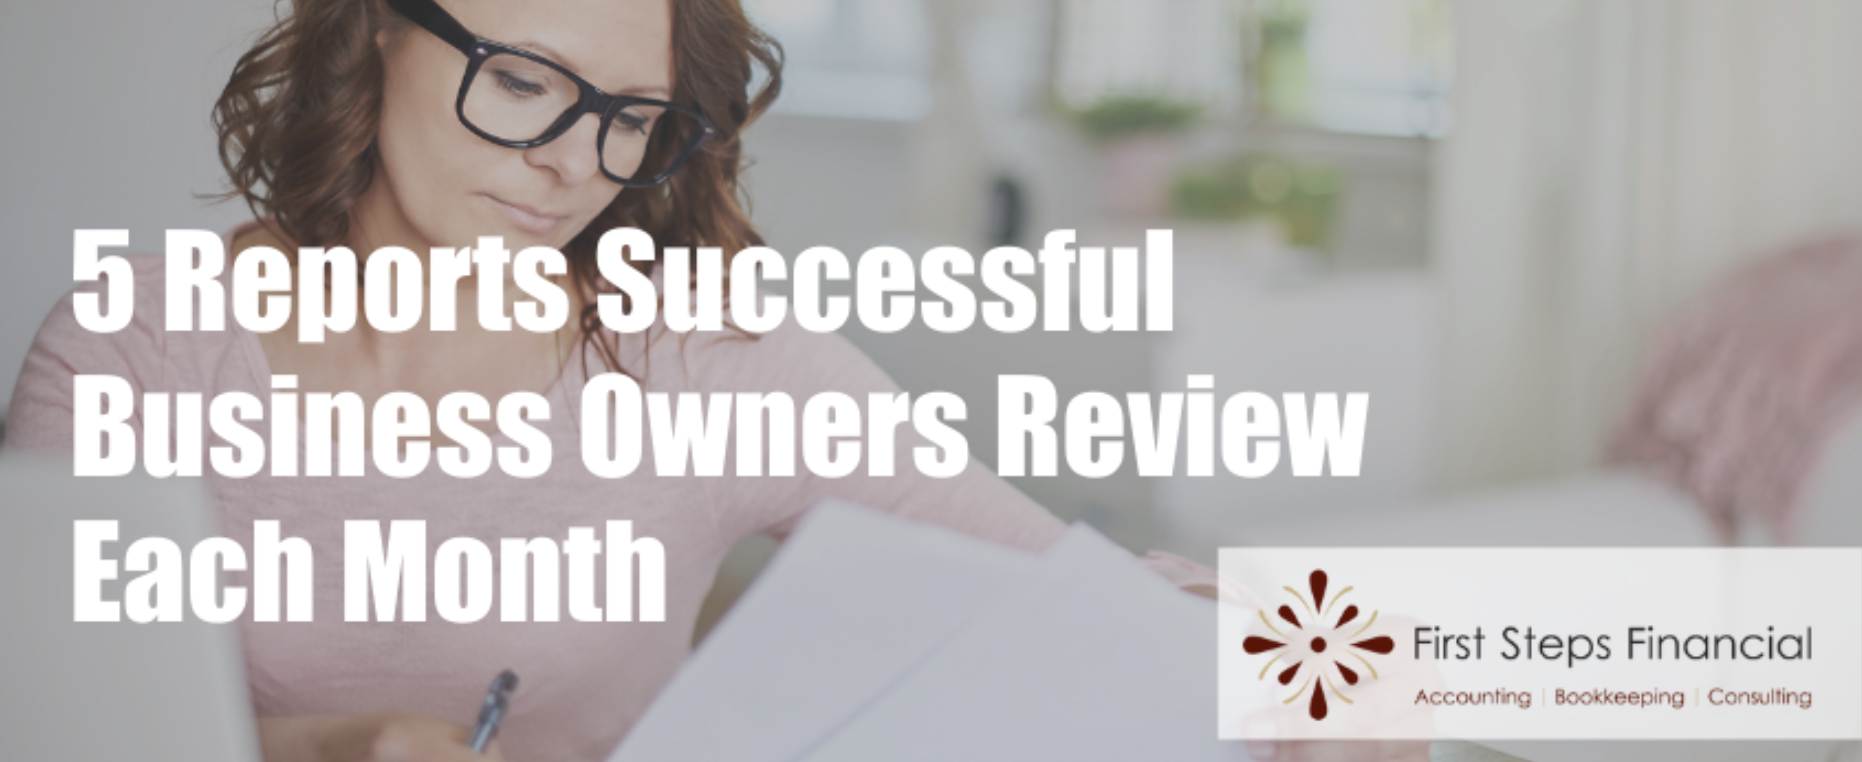 5 Reports Successful Business Owners Review Each Month